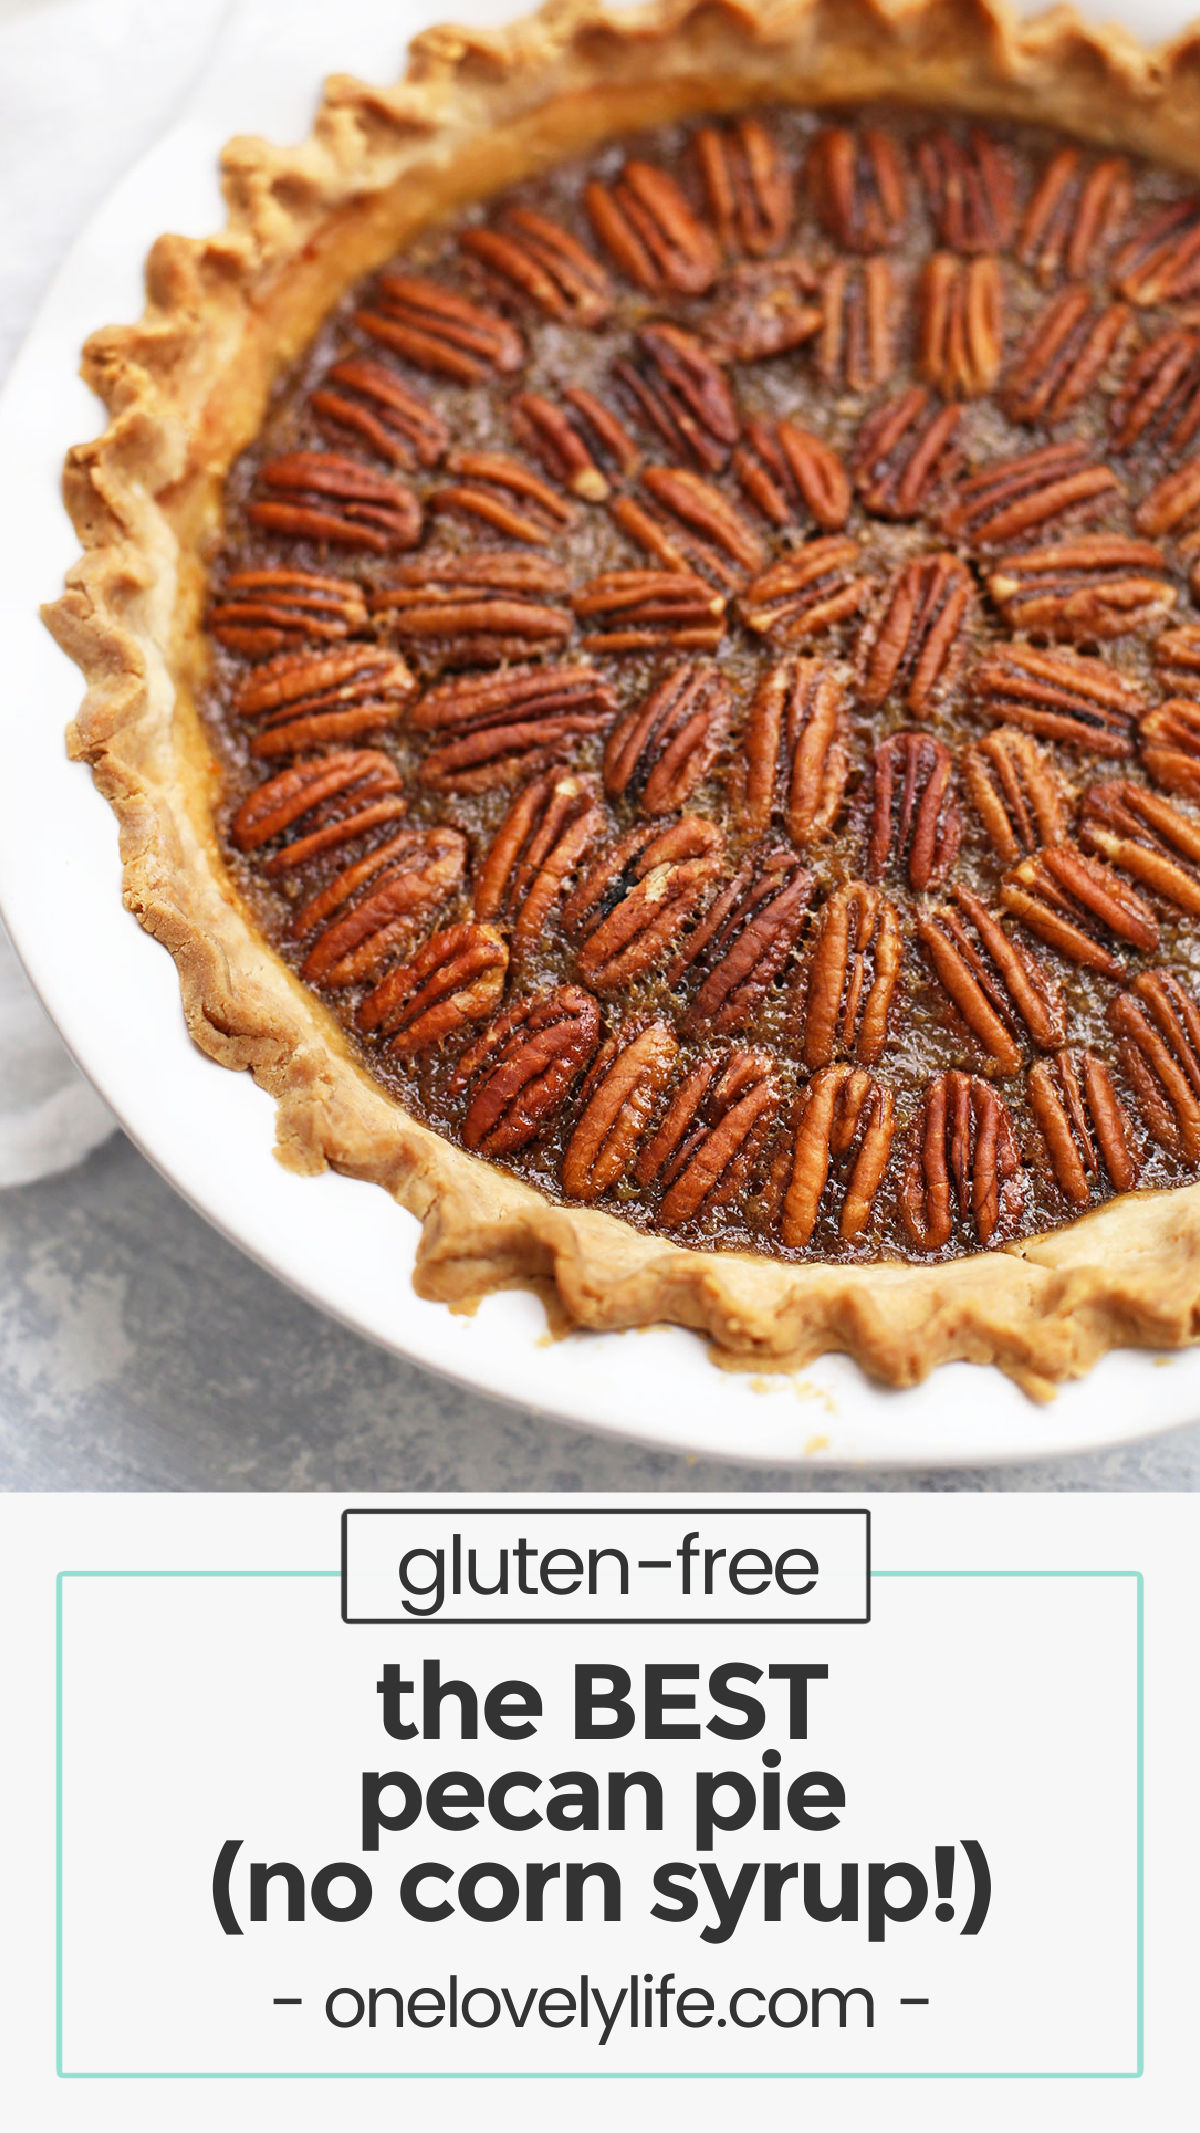 The BEST Pecan Pie Recipe - This yummy pecan pie is made without corn syrup. The filling is incredible and I love all the crust options. Gluten Free, Dairy Free & Paleo-Friendly! // paleo pecan pie // healthy pecan pie // pecan pie no corn syrup // no corn syrup pecan pie // pecan pie // paleo thanksgiving // gluten free thanksgiving // thanksgiving pie